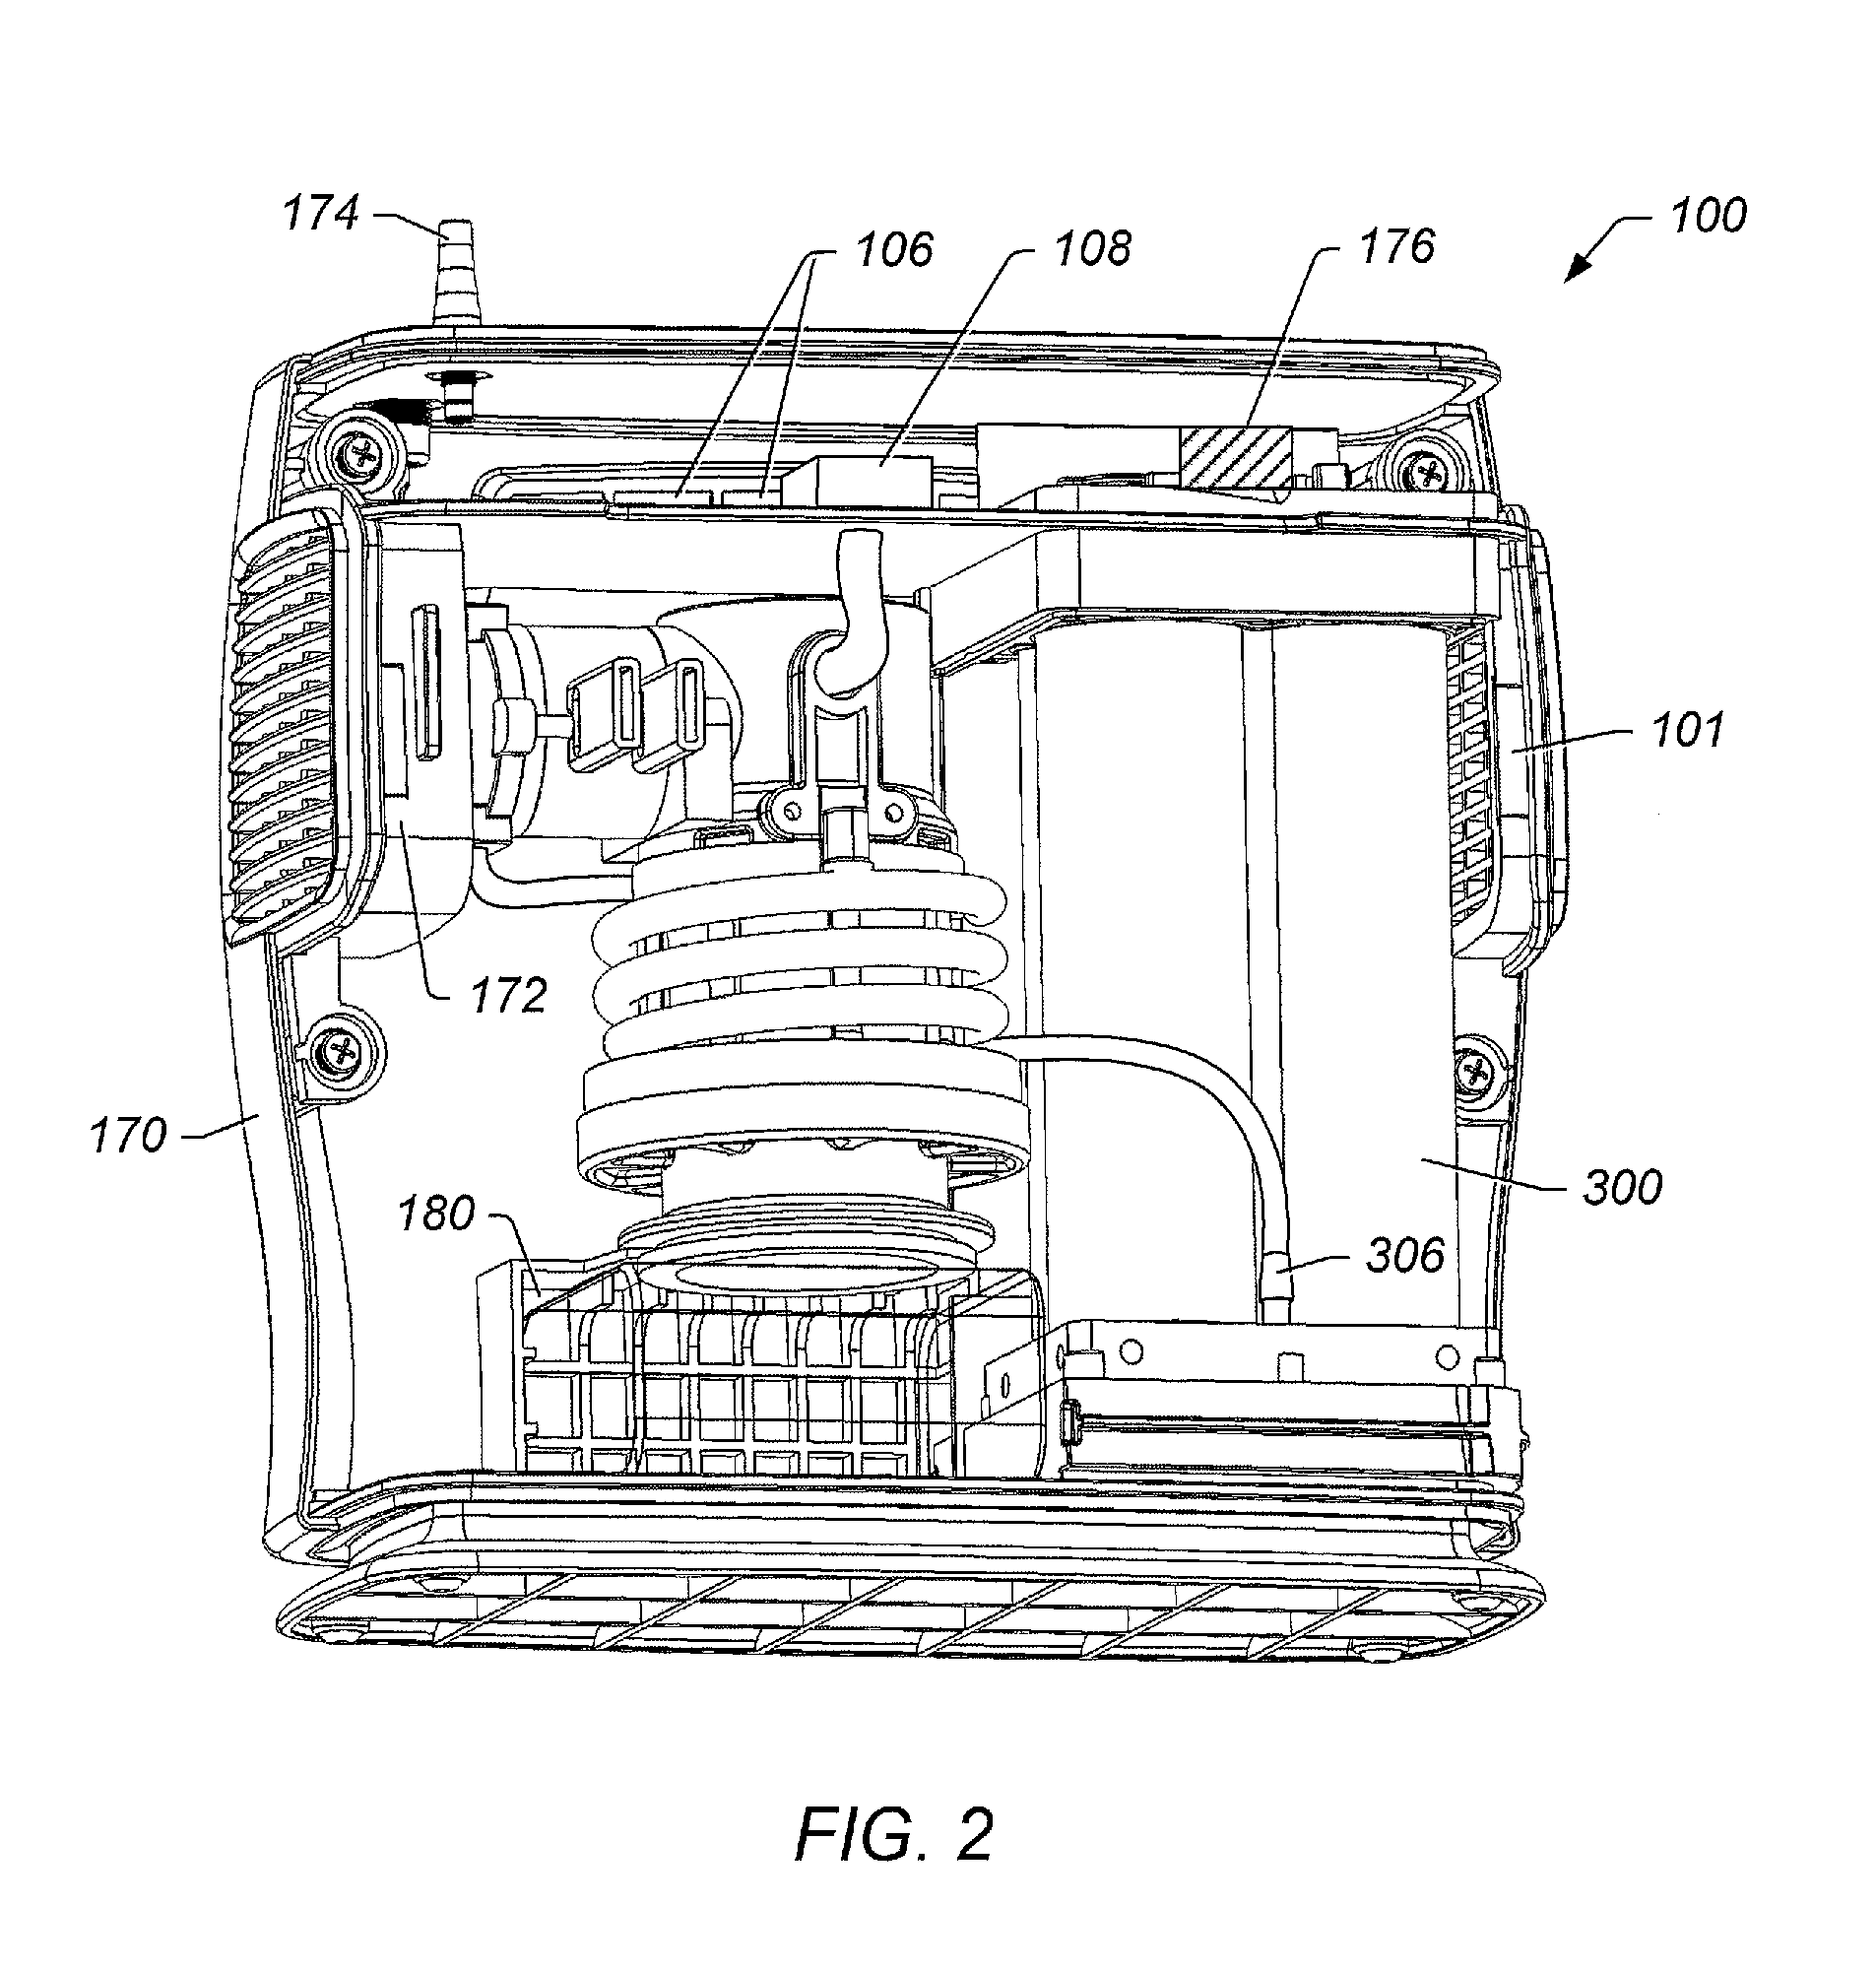 Positive pressure therapy systems and methods